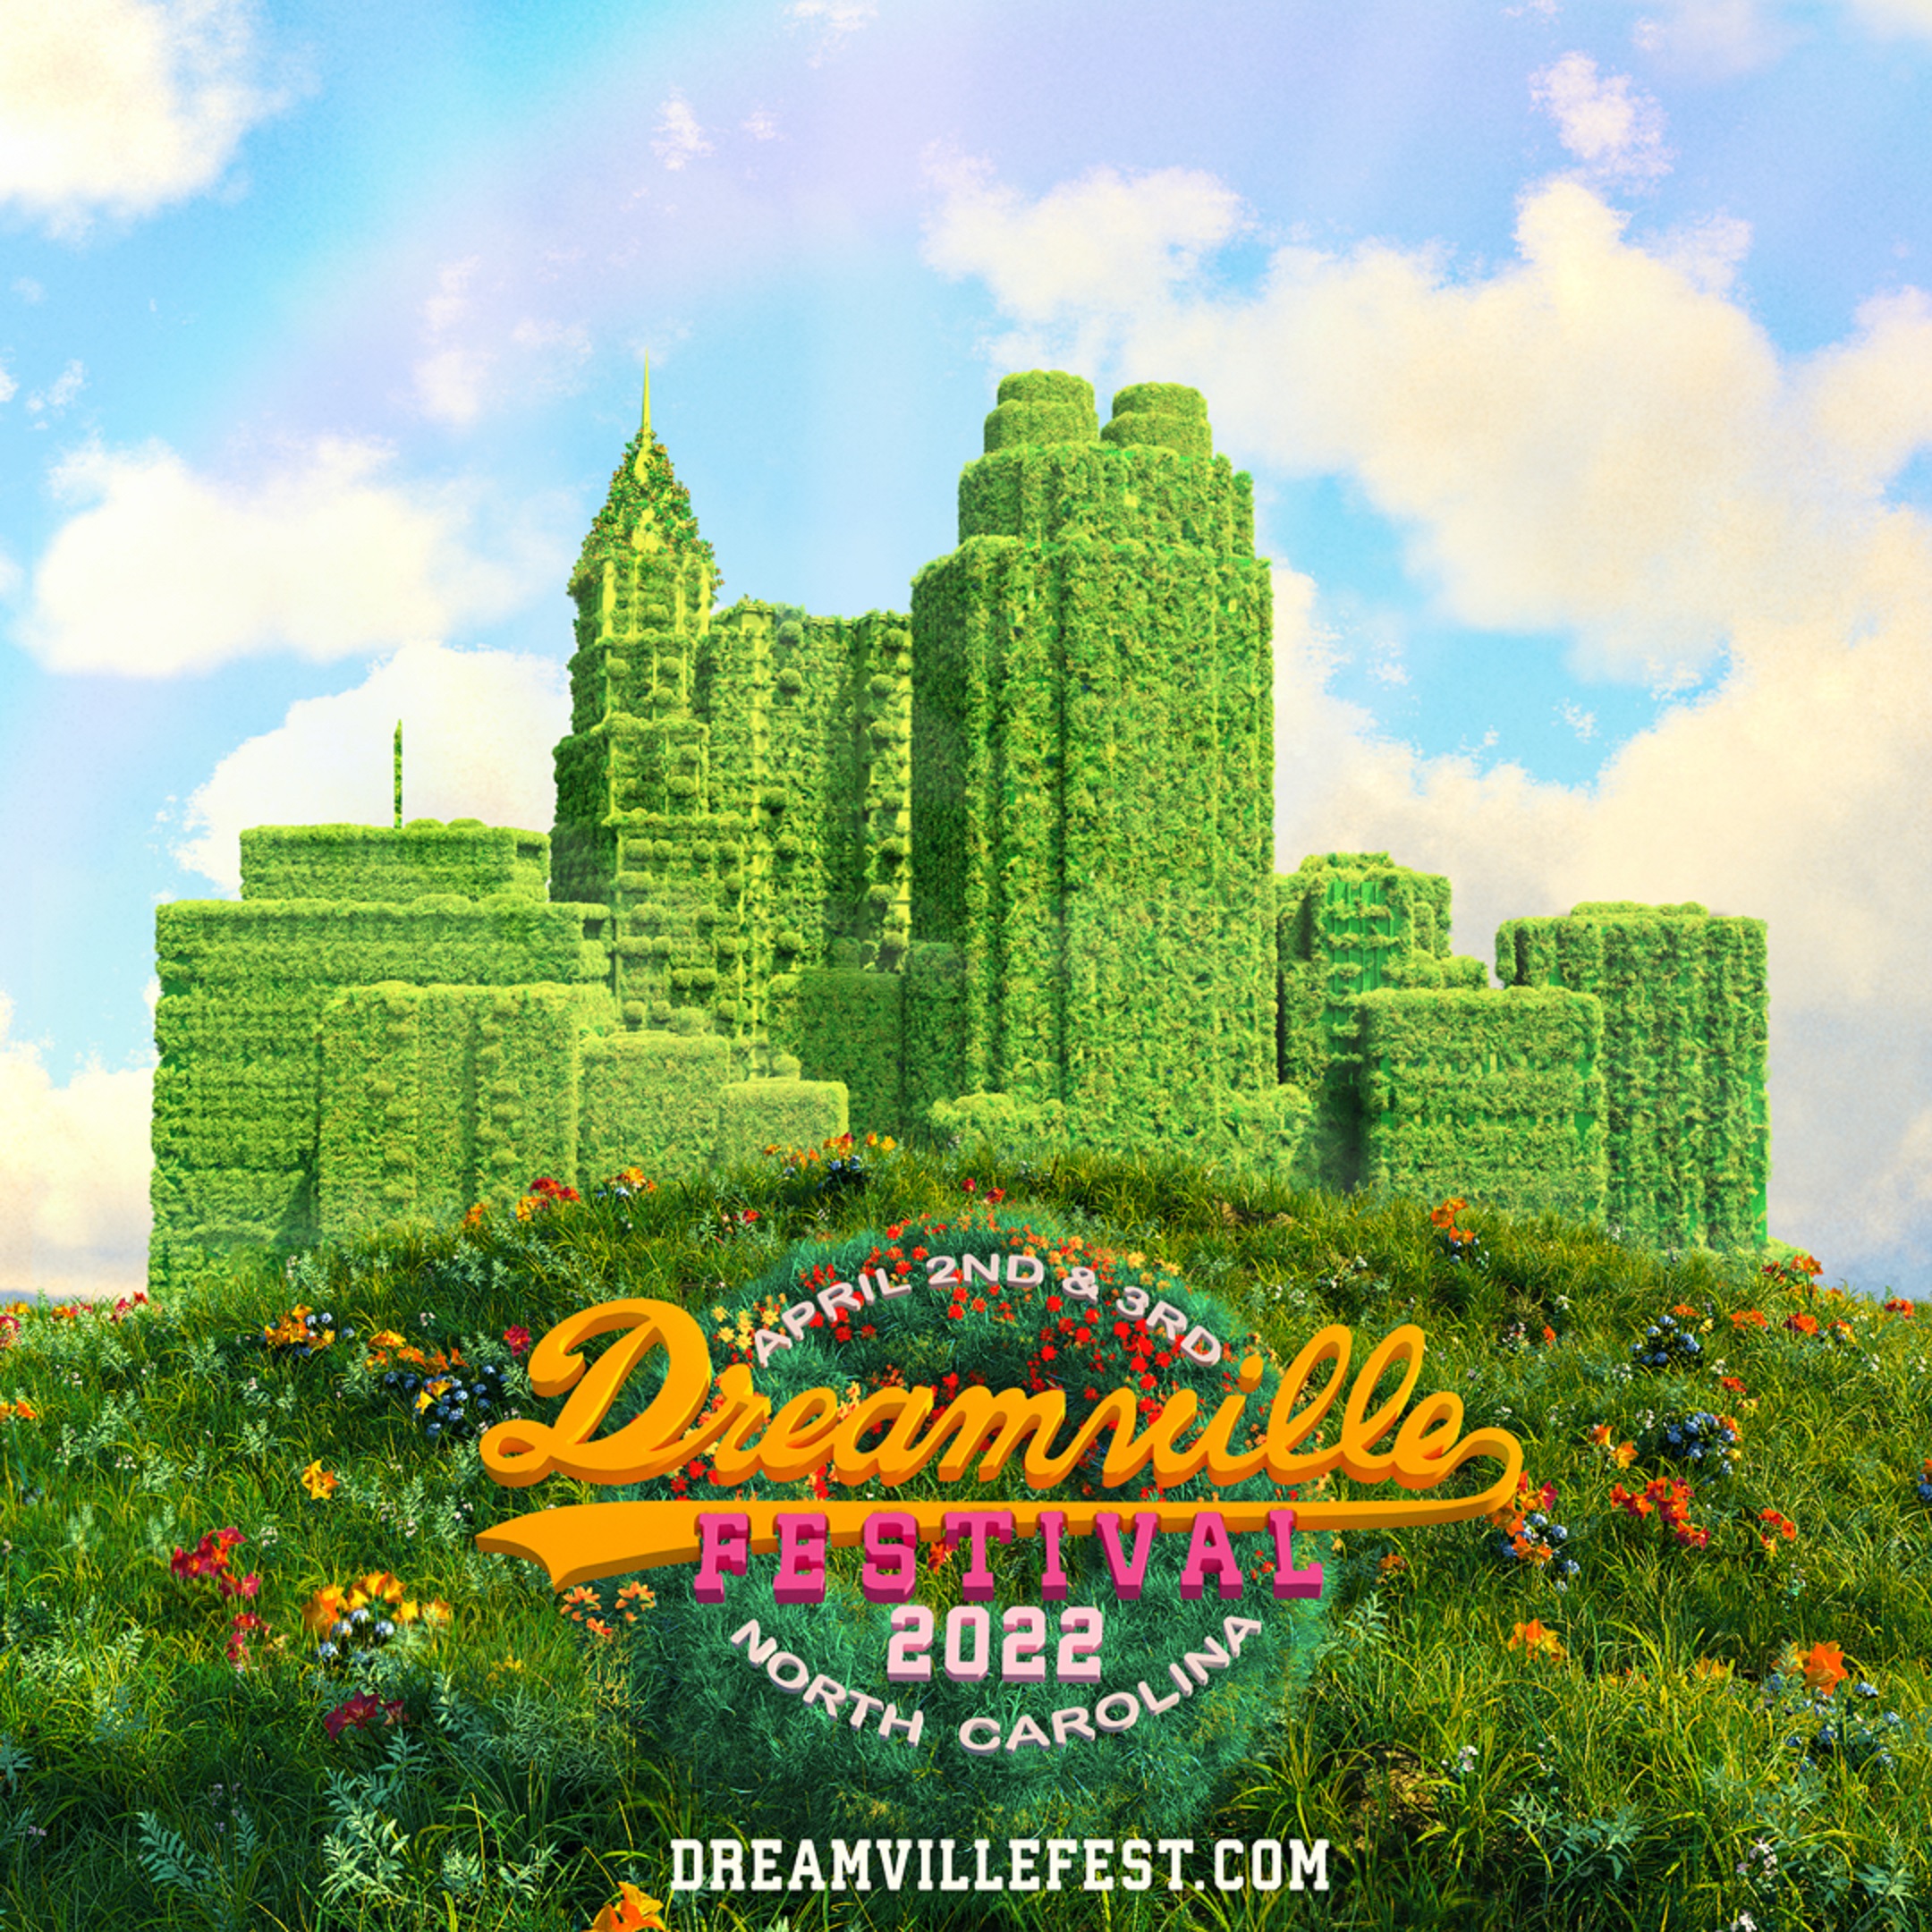 DREAMVILLE FESTIVAL MUSIC FESTIVAL EXPANDS TO TWO DAYS ON APRIL 2-3, 2022